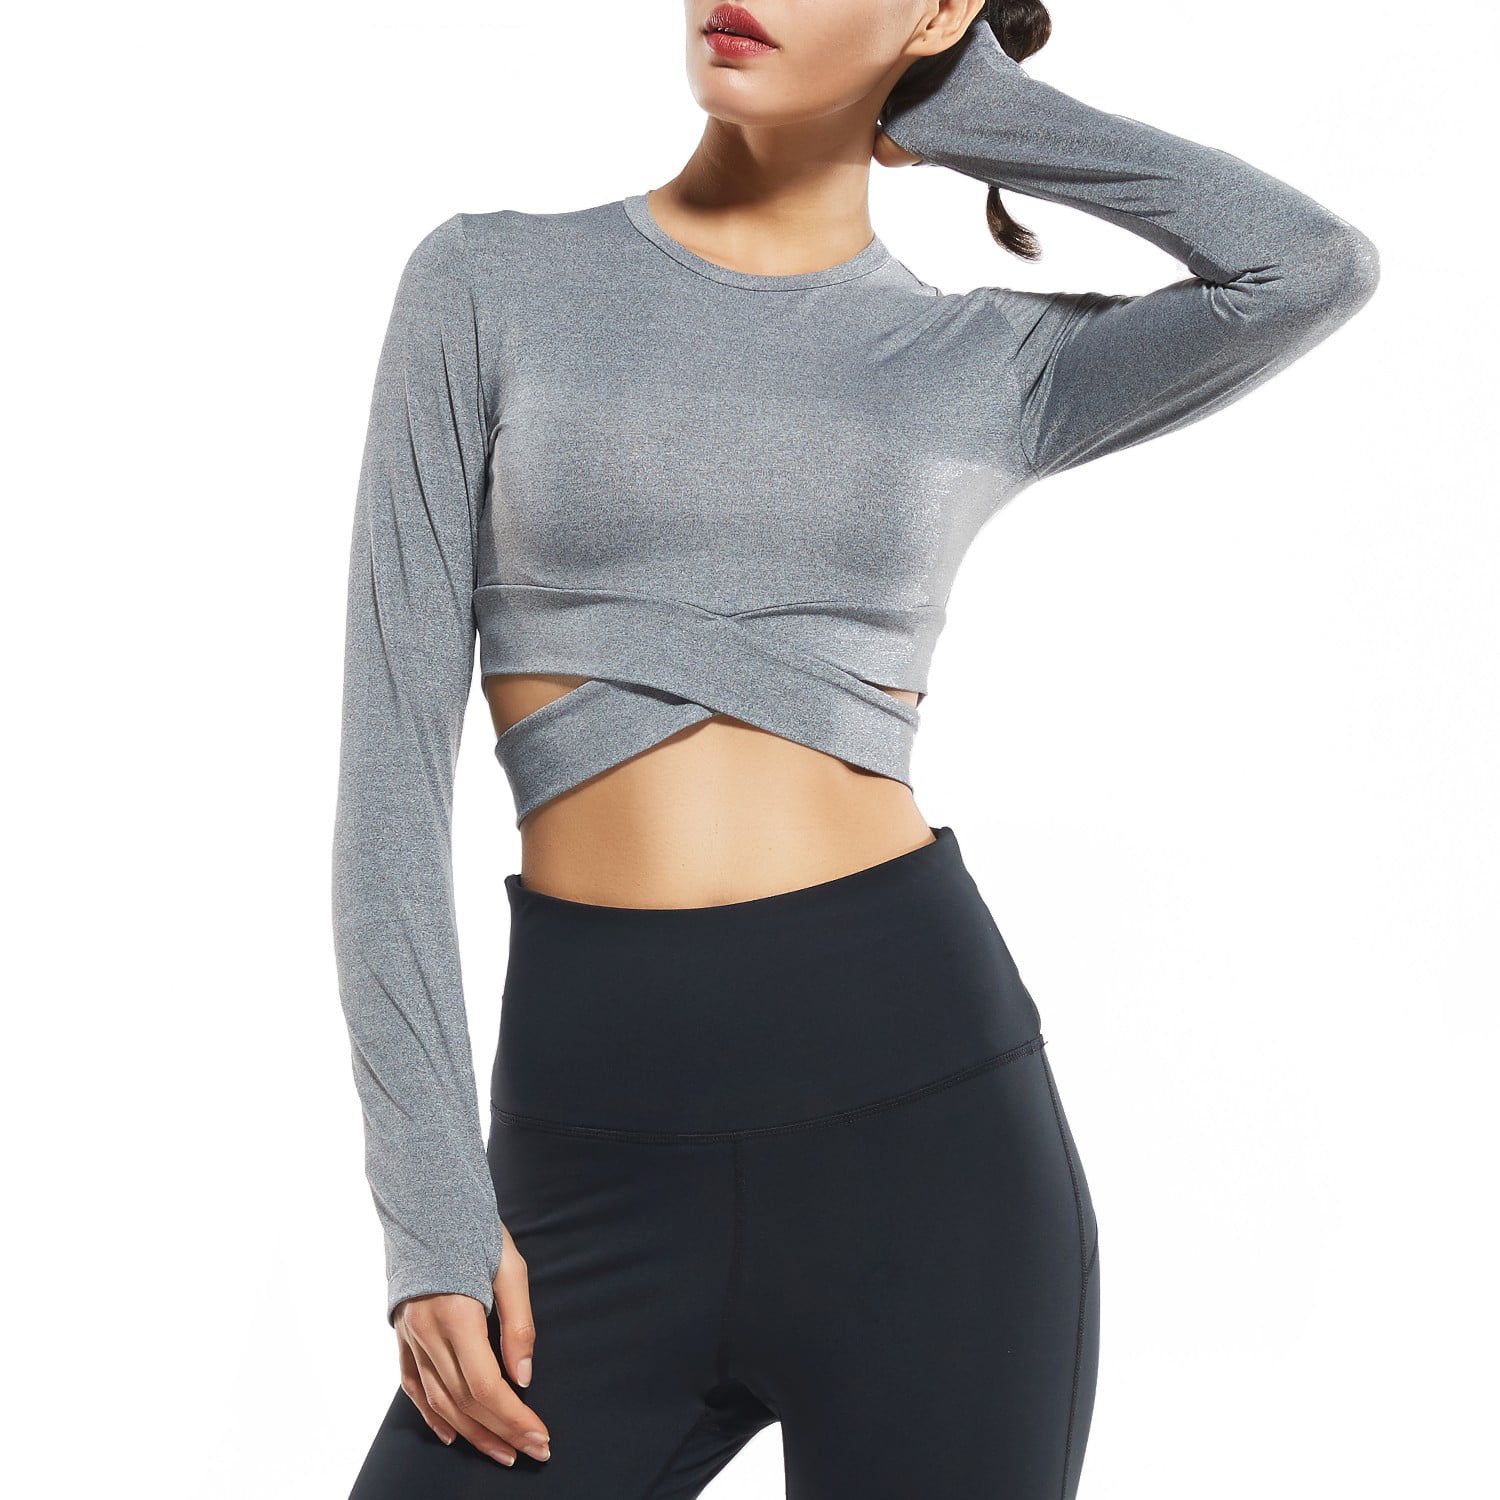 6 Day Workout Sweater Womens for Build Muscle